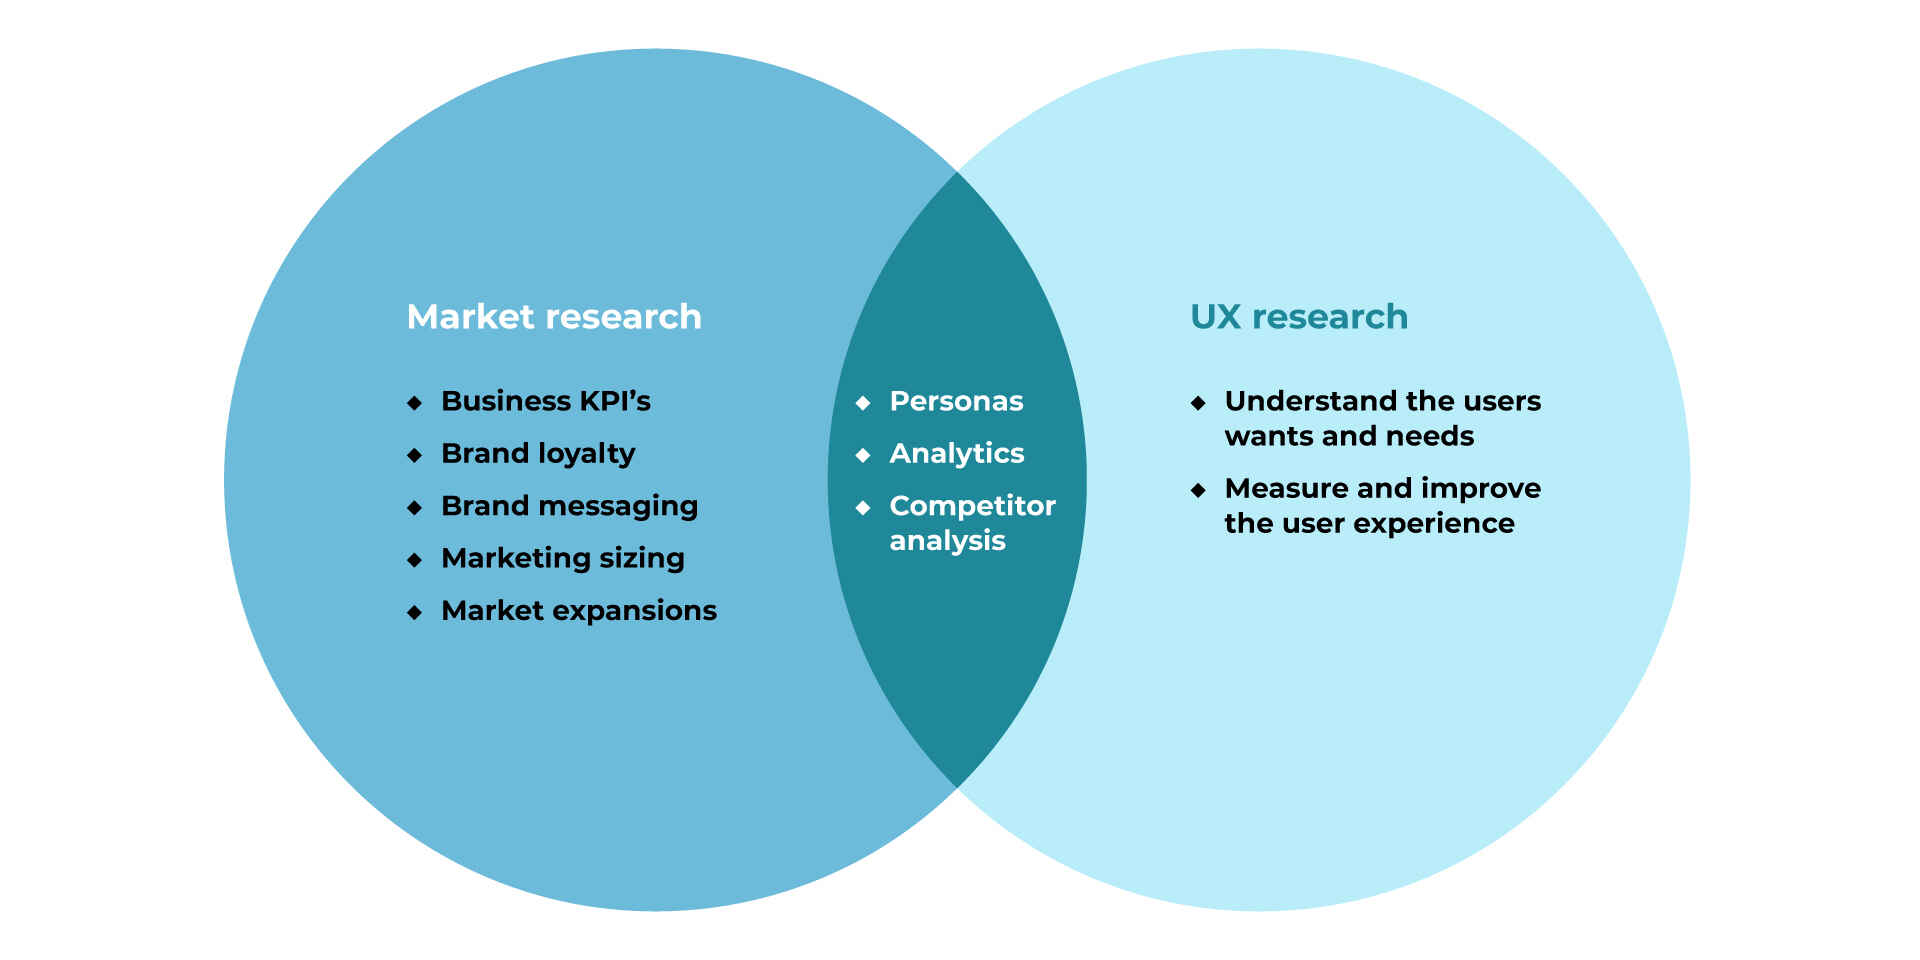 Things to consider when creating a finance app include conducting user research